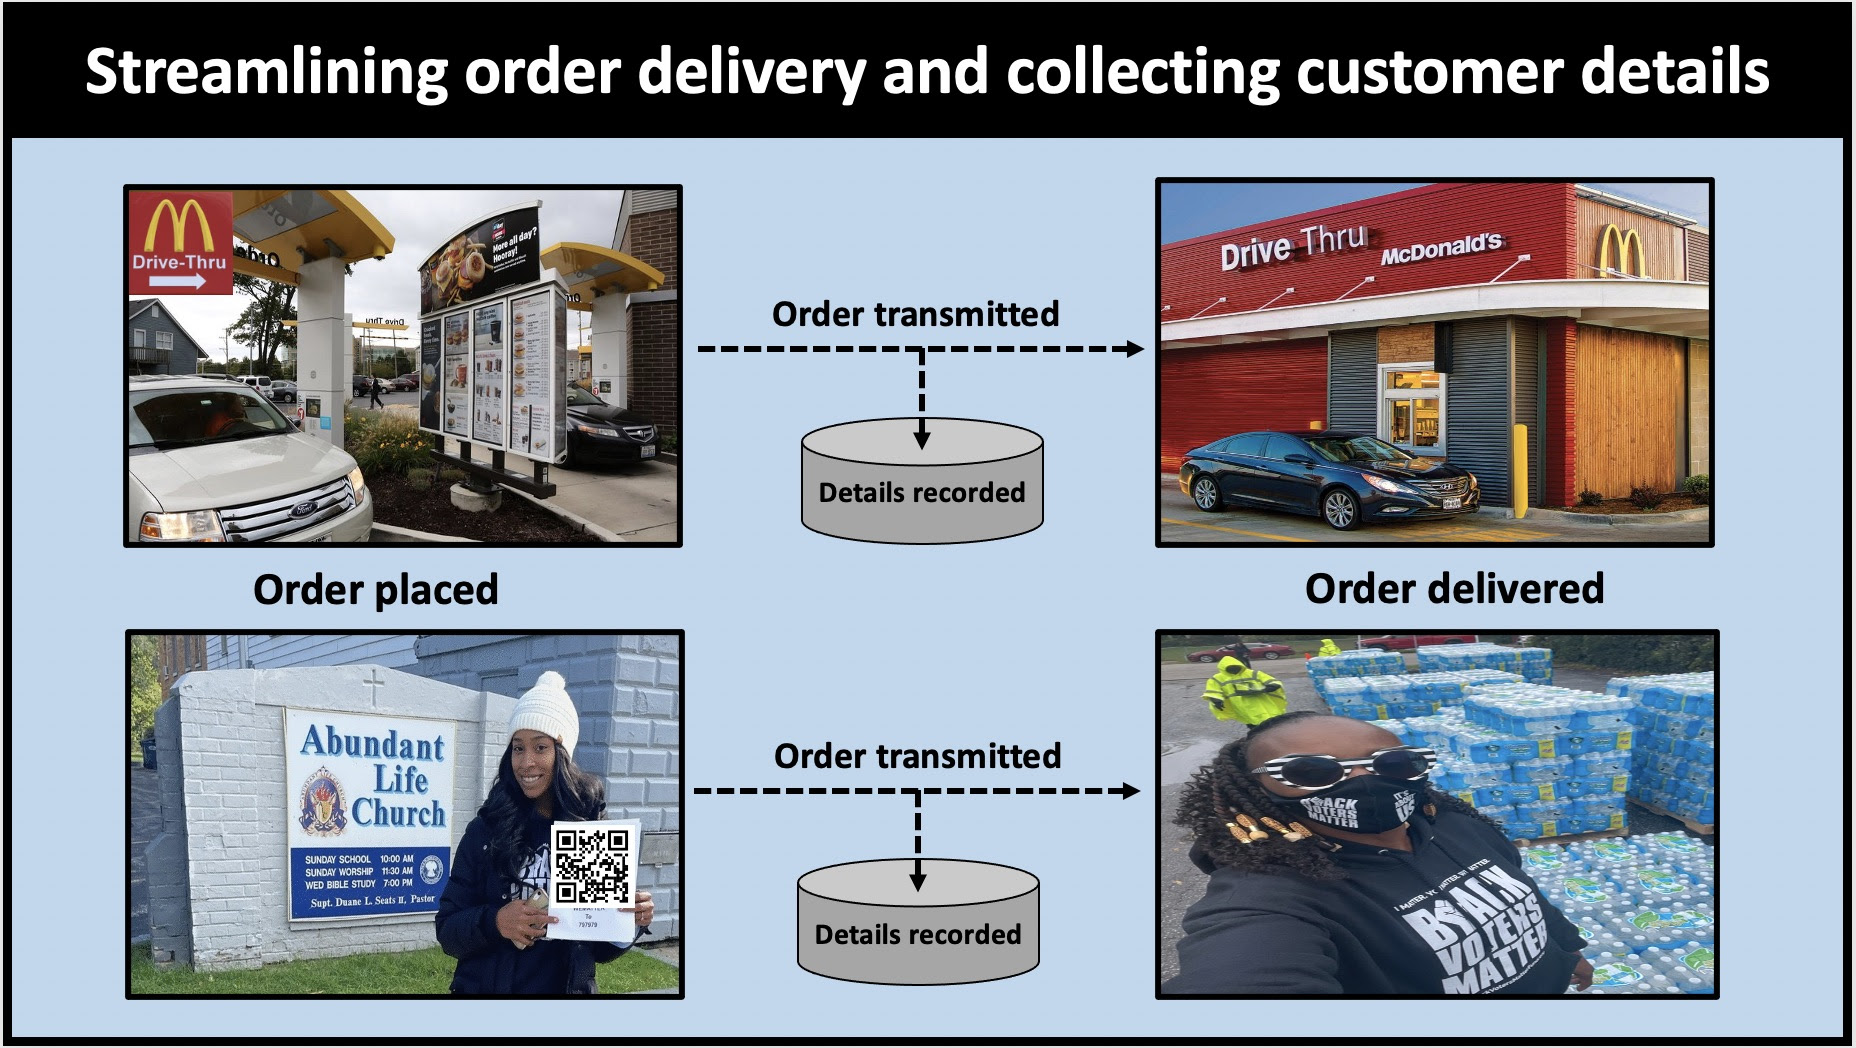 Streamline delivery of relief supplies with QR Codes and chatbots.